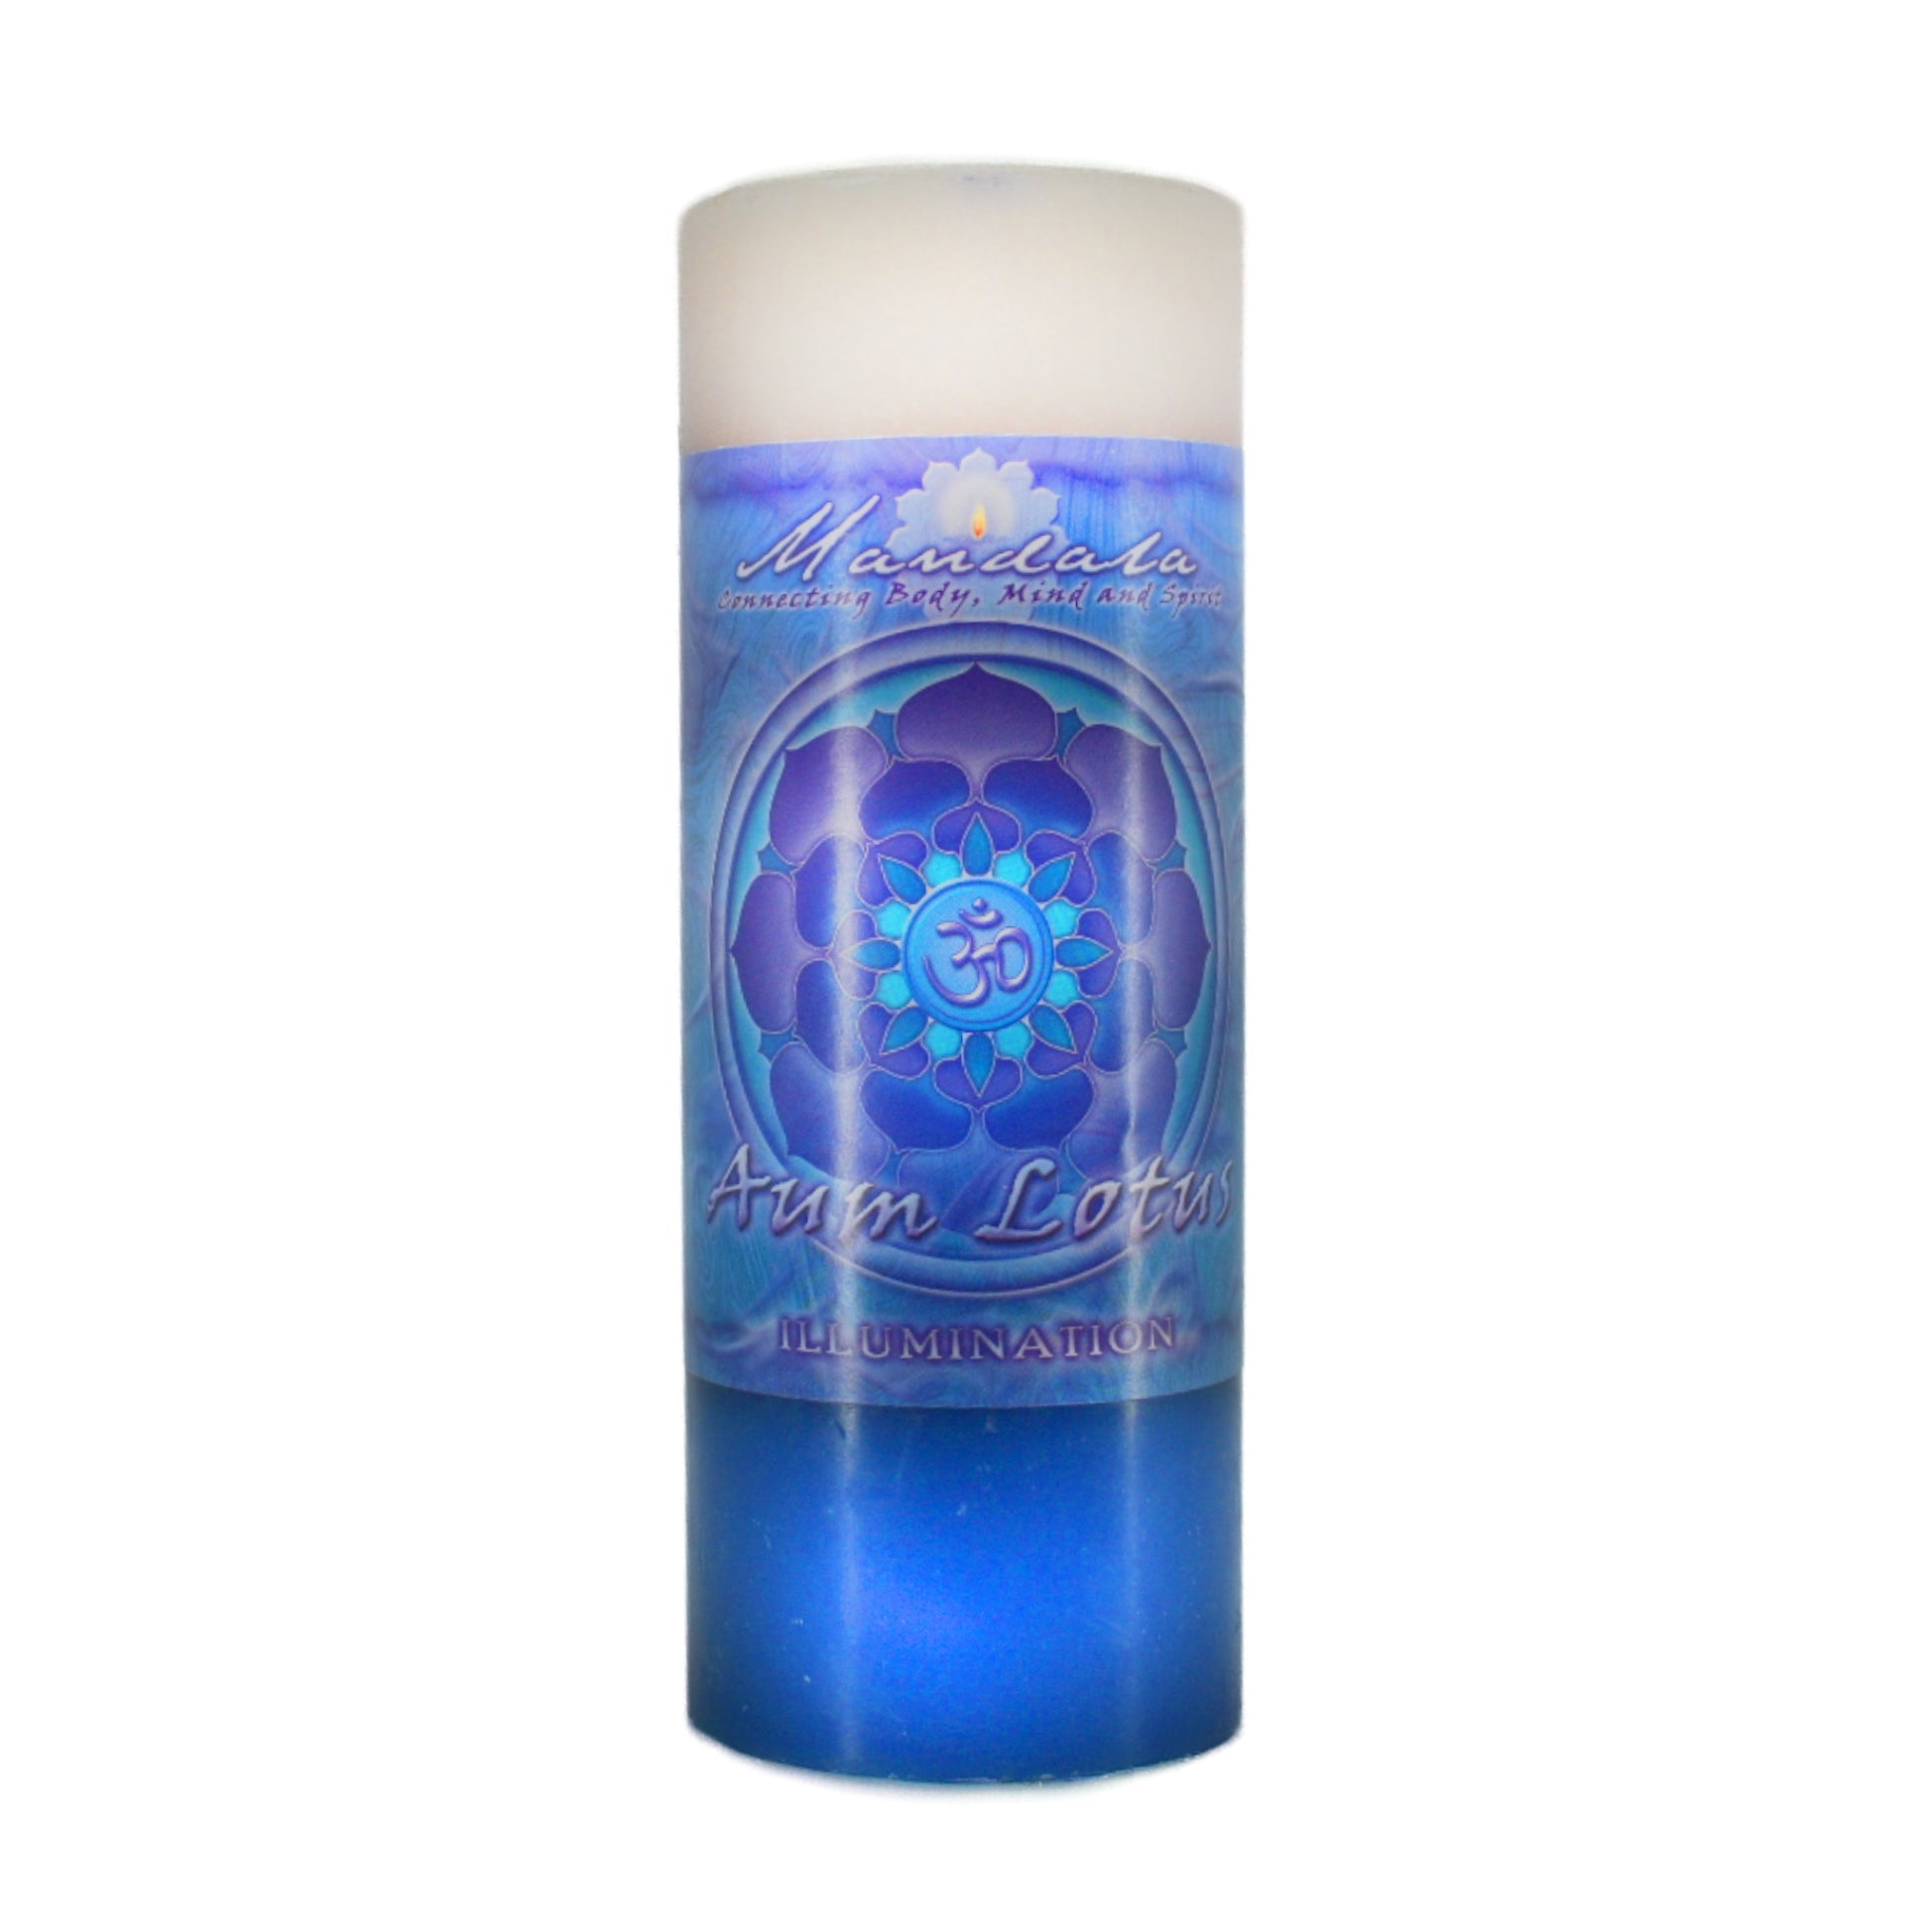 Illumination Mandala Candle.  Burn the candle to enhance: Truth &amp; illumination, spiritual insight, and higher awareness and intent.  Scented with East Indian sandalwood, patchouli and amber.  Candle is white at the top and blue at the bottom.